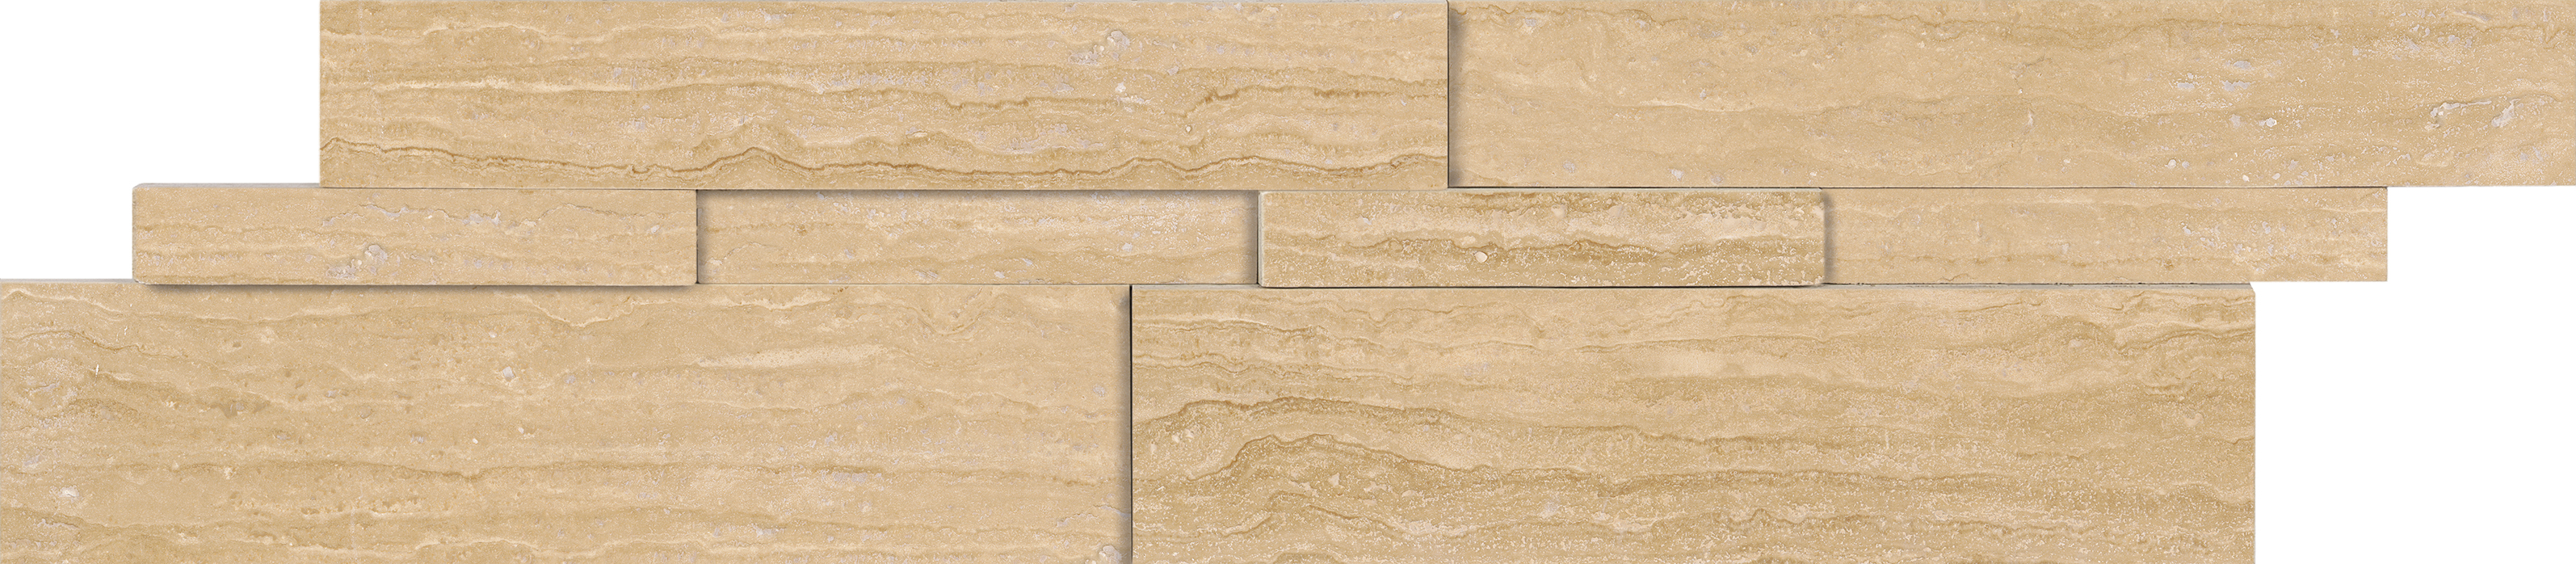 travertine siena avorio pattern natural stone wall panel from cubics anatolia collection distributed by surface group international honed finish straight edge edge 6x24 interlocking shape